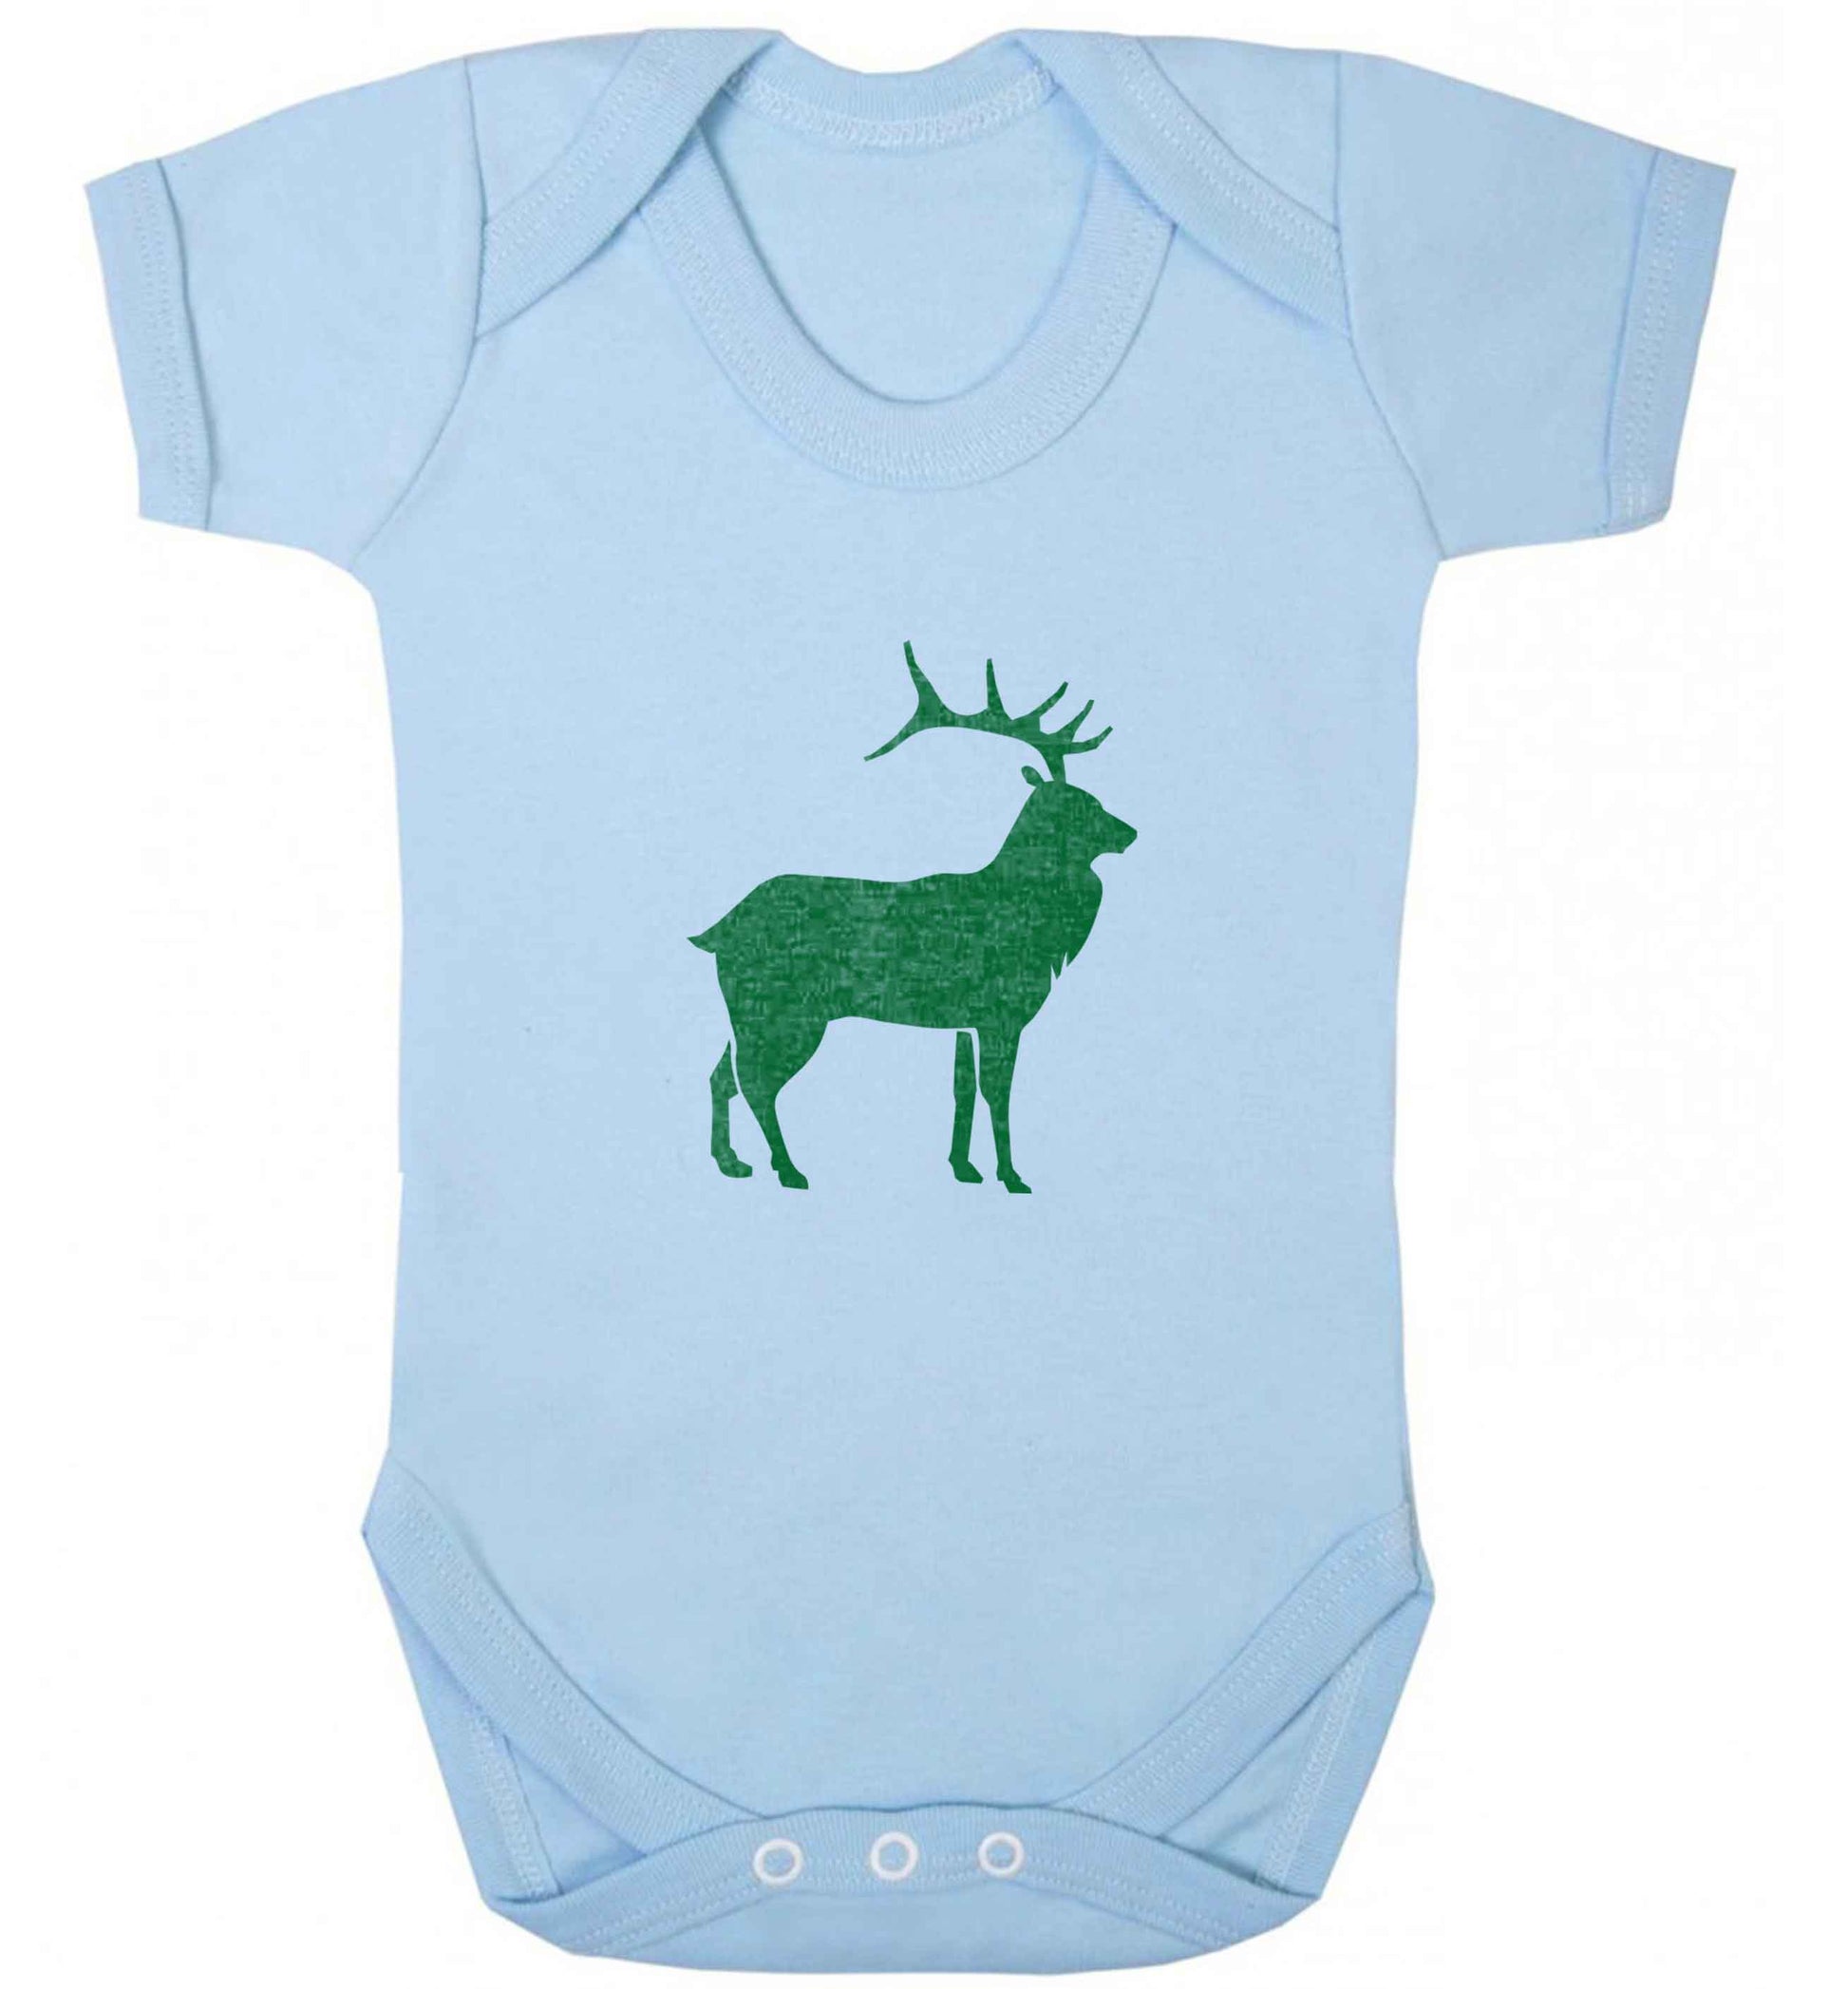 Green stag baby vest pale blue 18-24 months